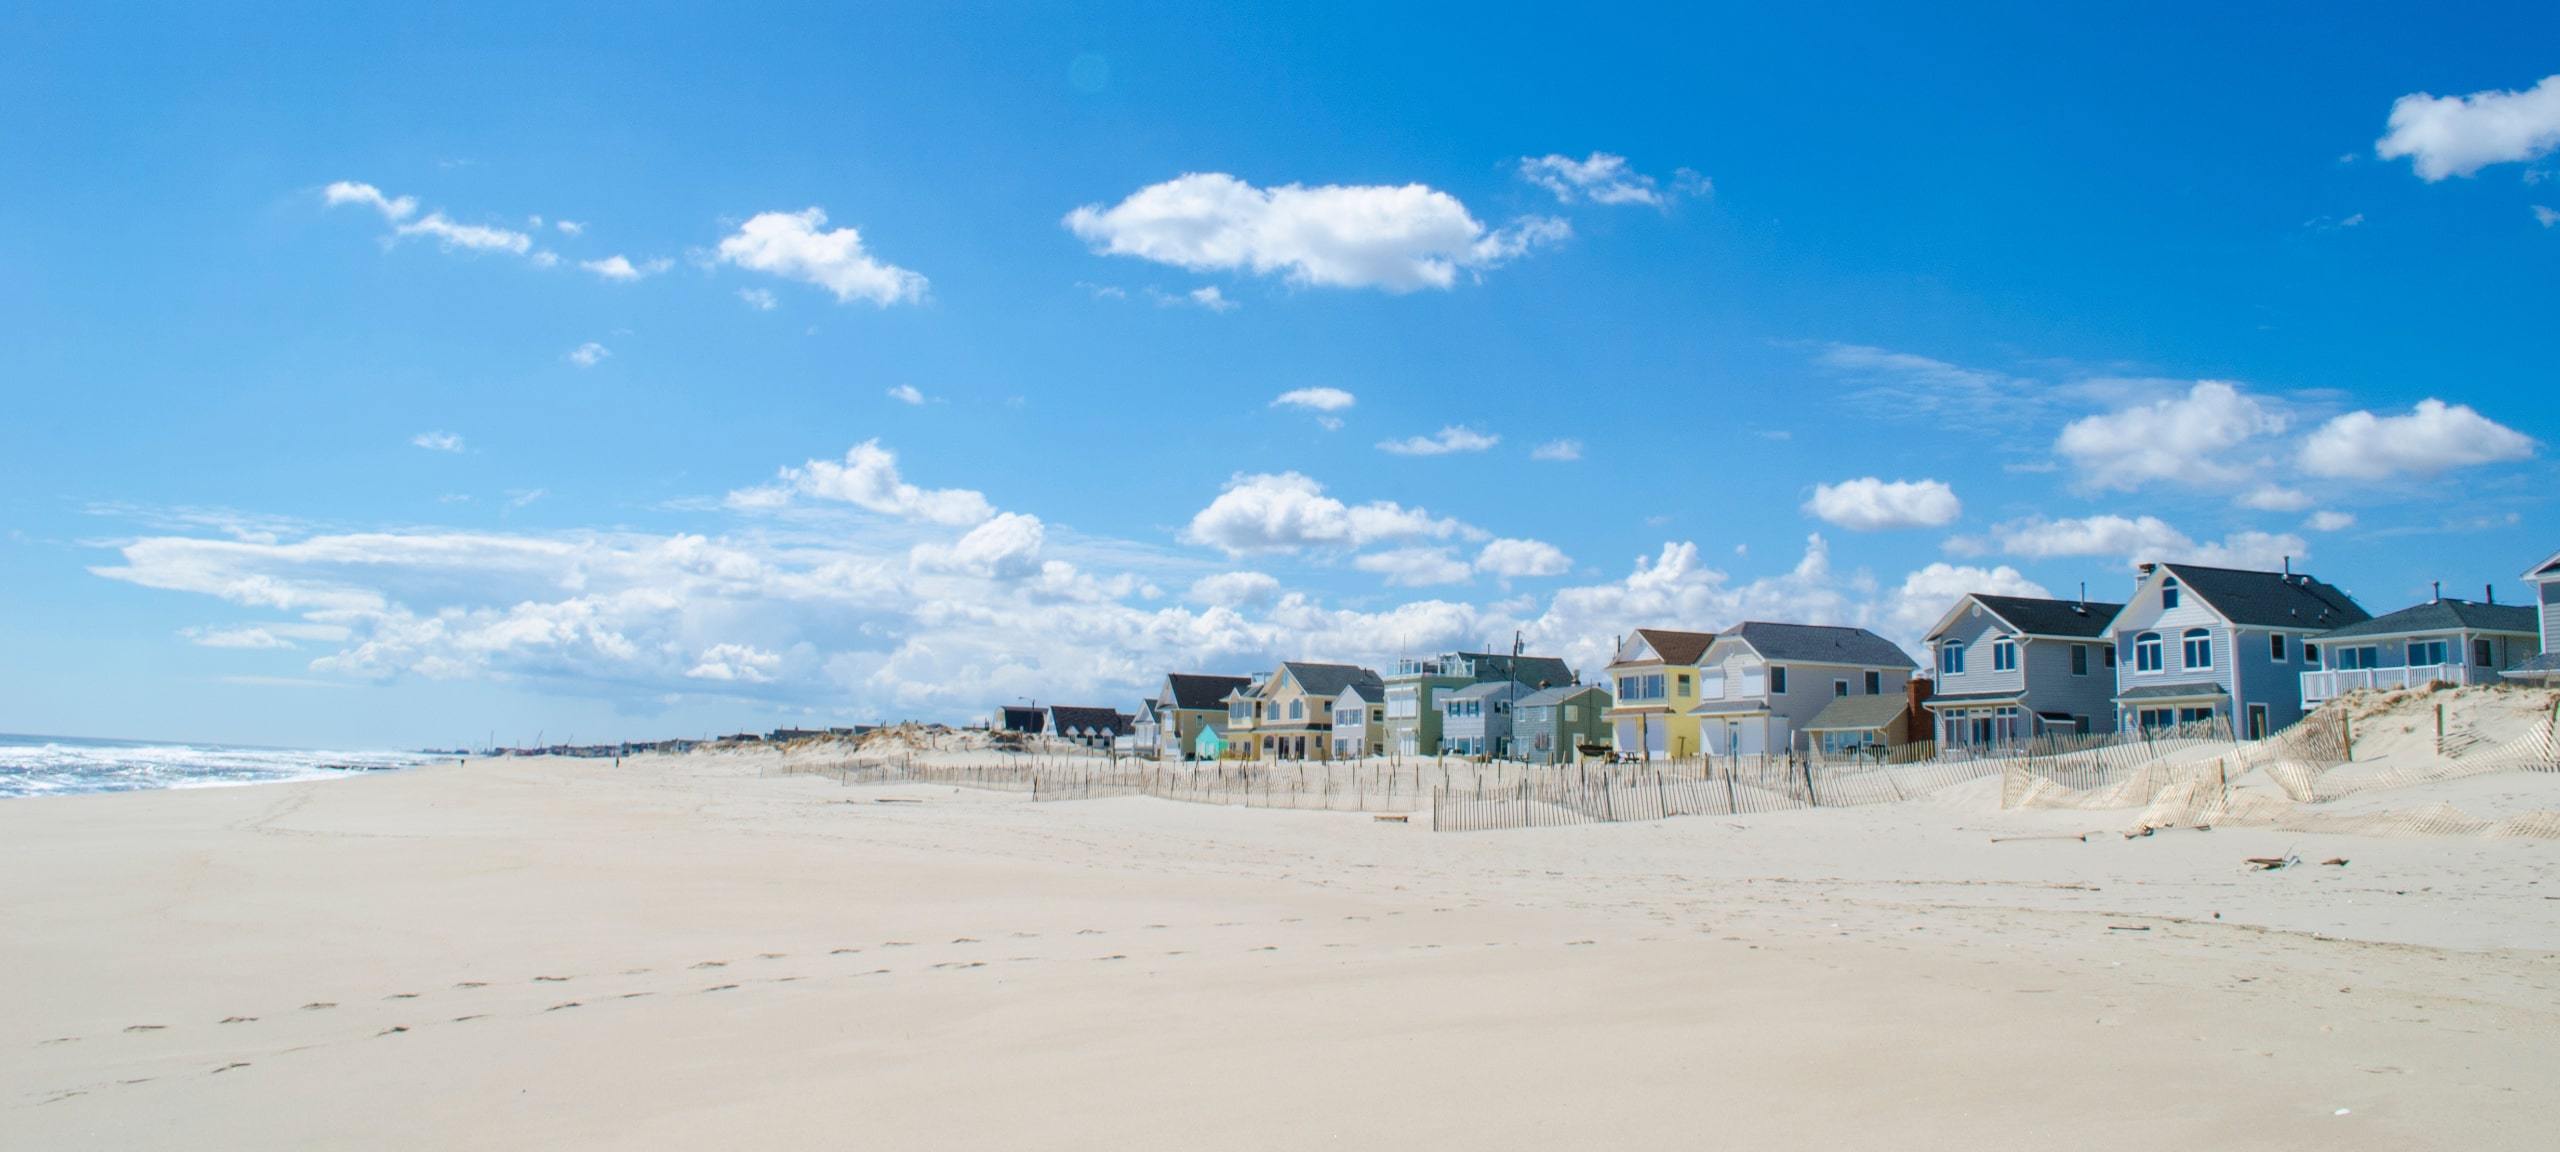 Lavallette, NJ Vacation Rentals Vacation Homes In Lavallette